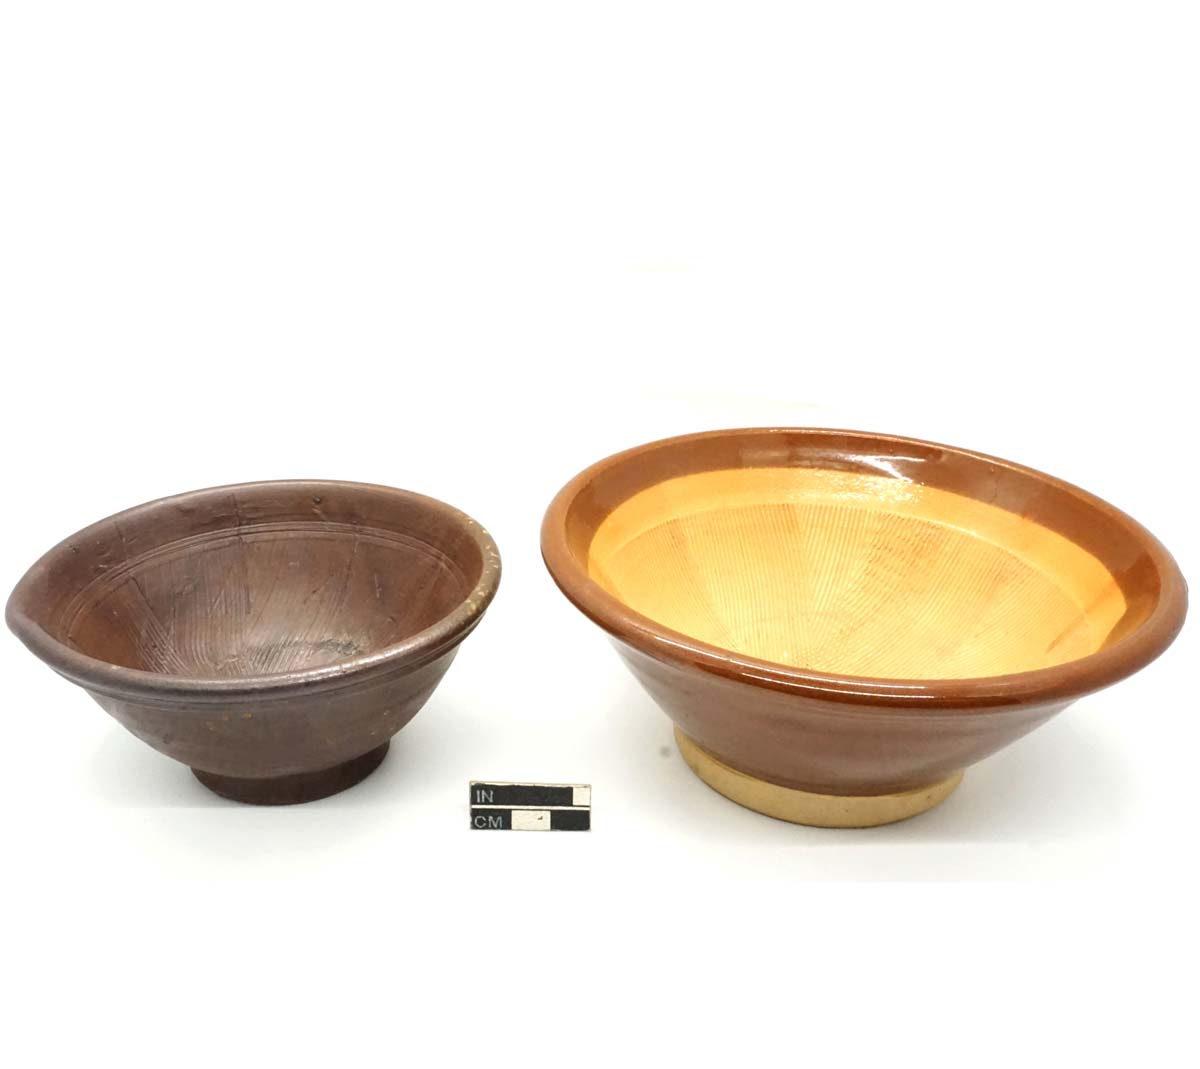 Suribachi (grinding bowls) with combed interiors, stoneware.